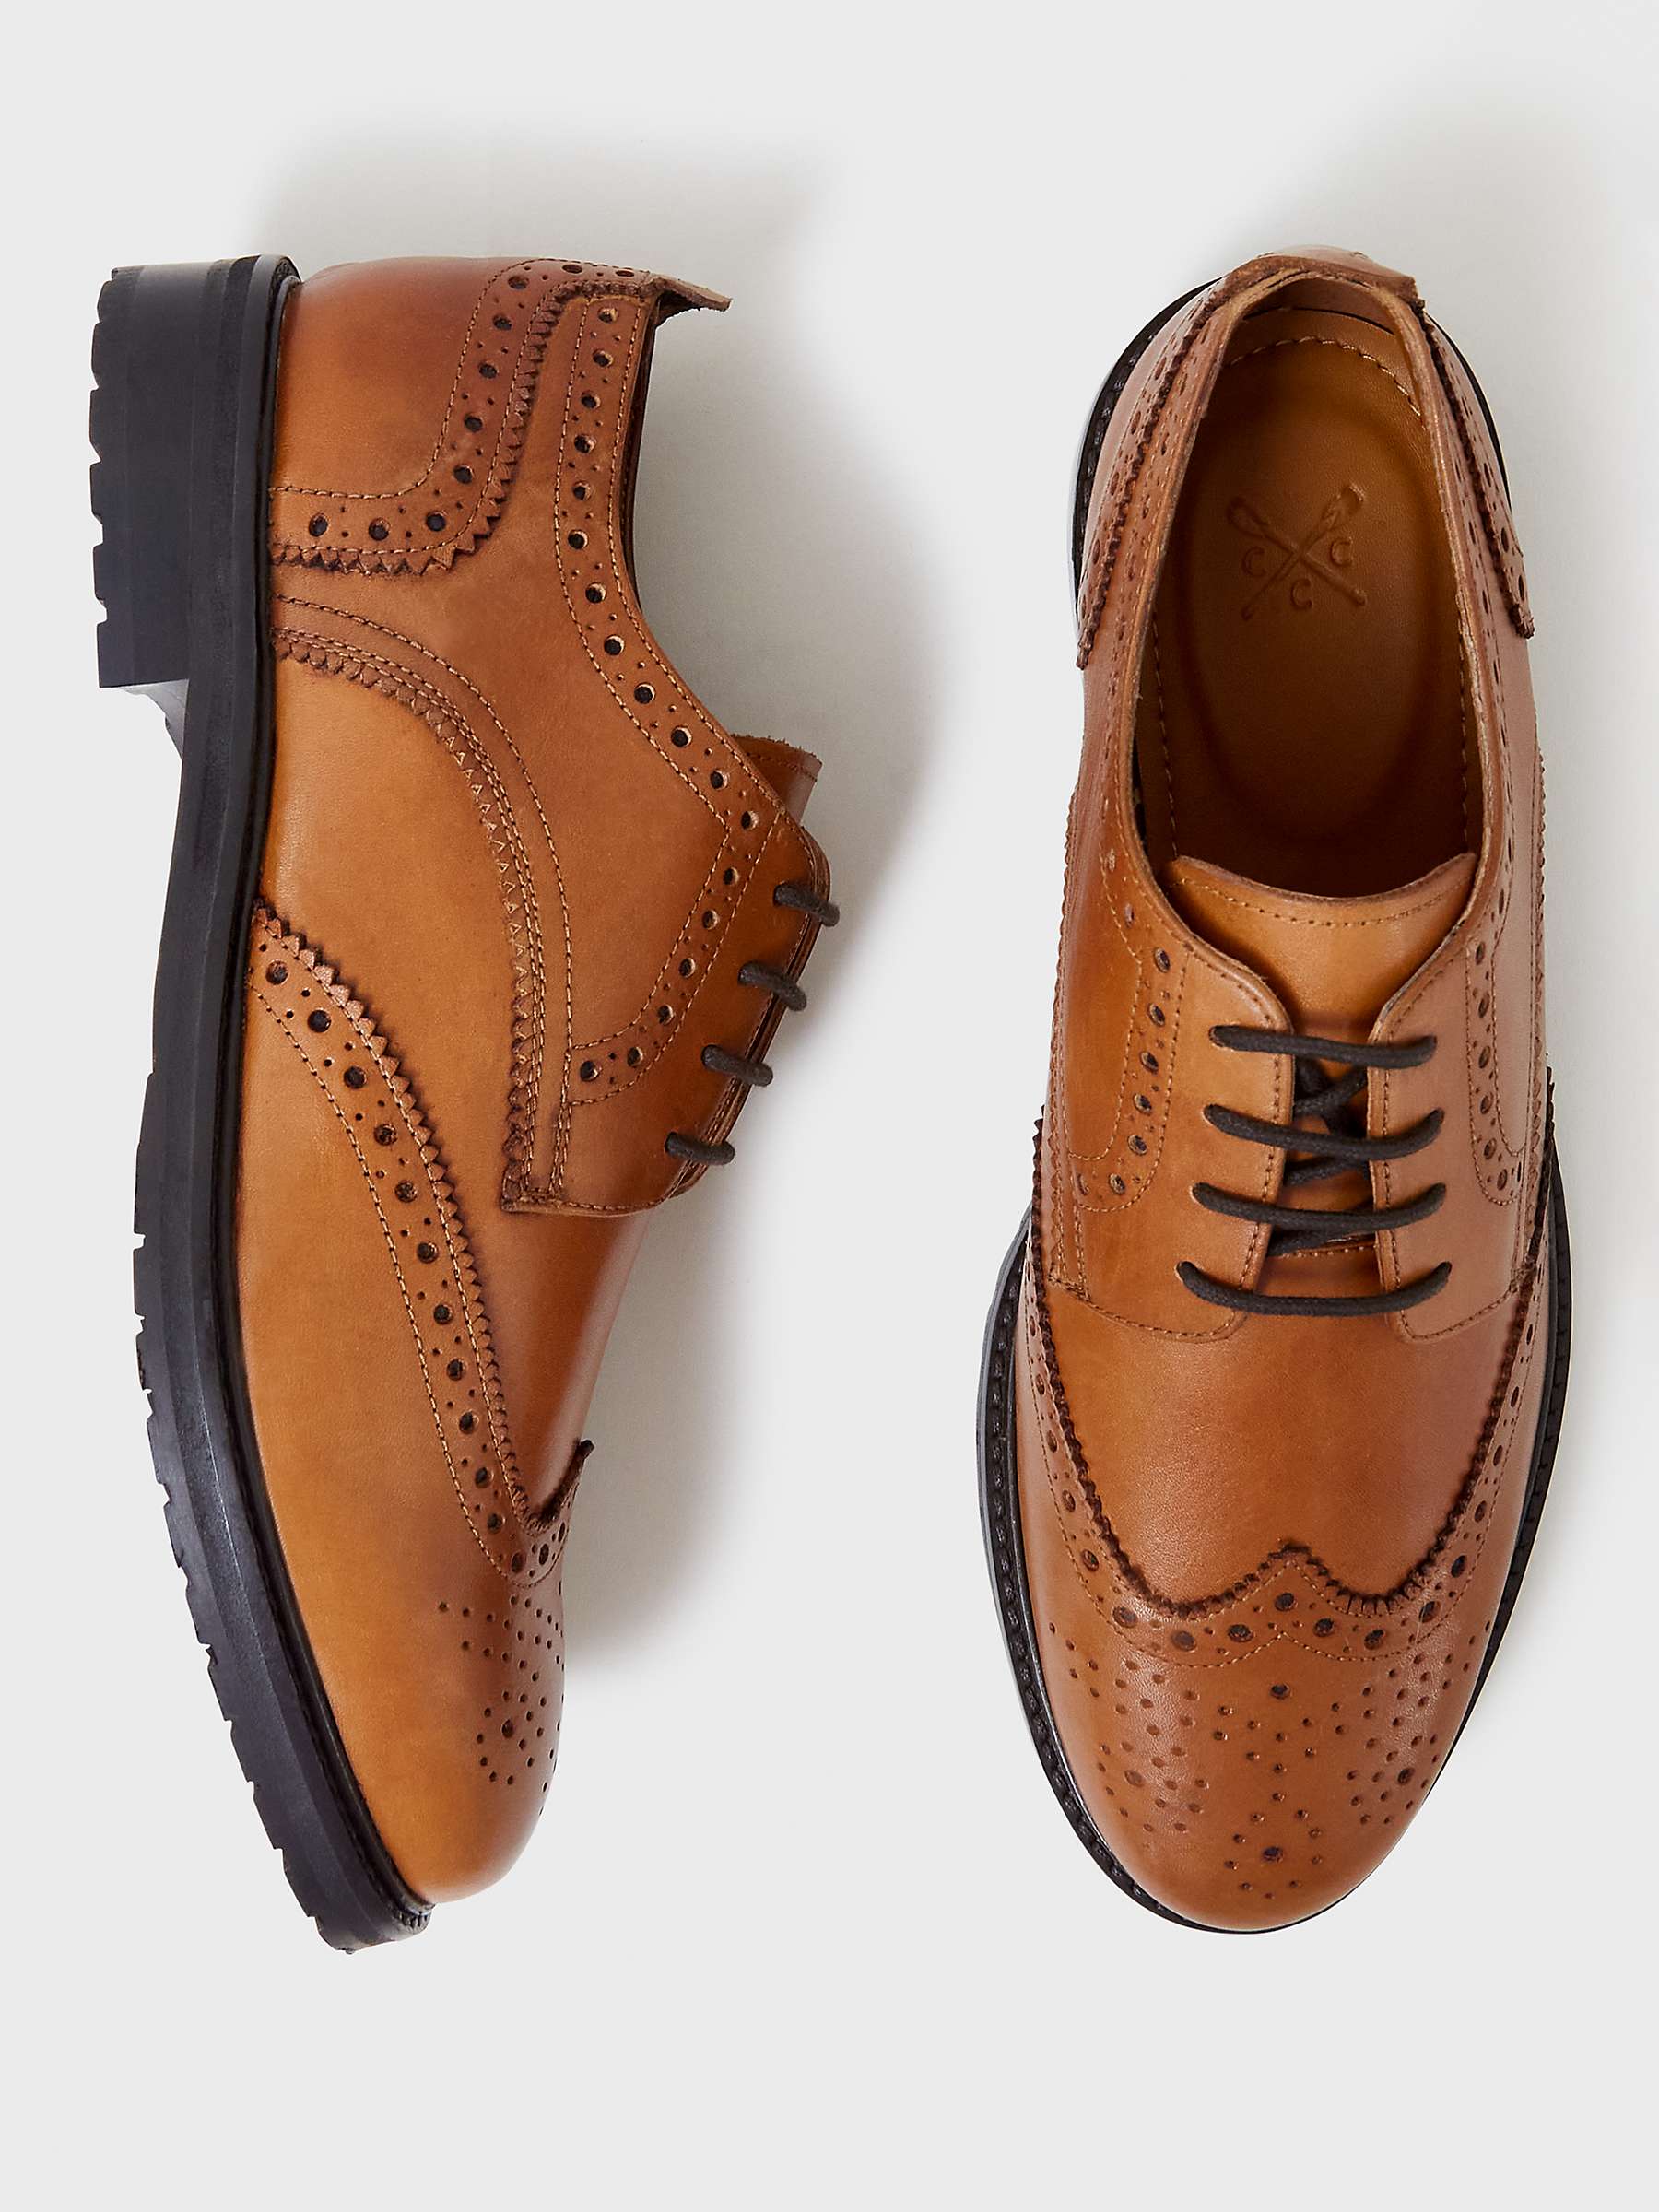 Buy Crew Clothing Arthur Leather Brogues, Tan Online at johnlewis.com